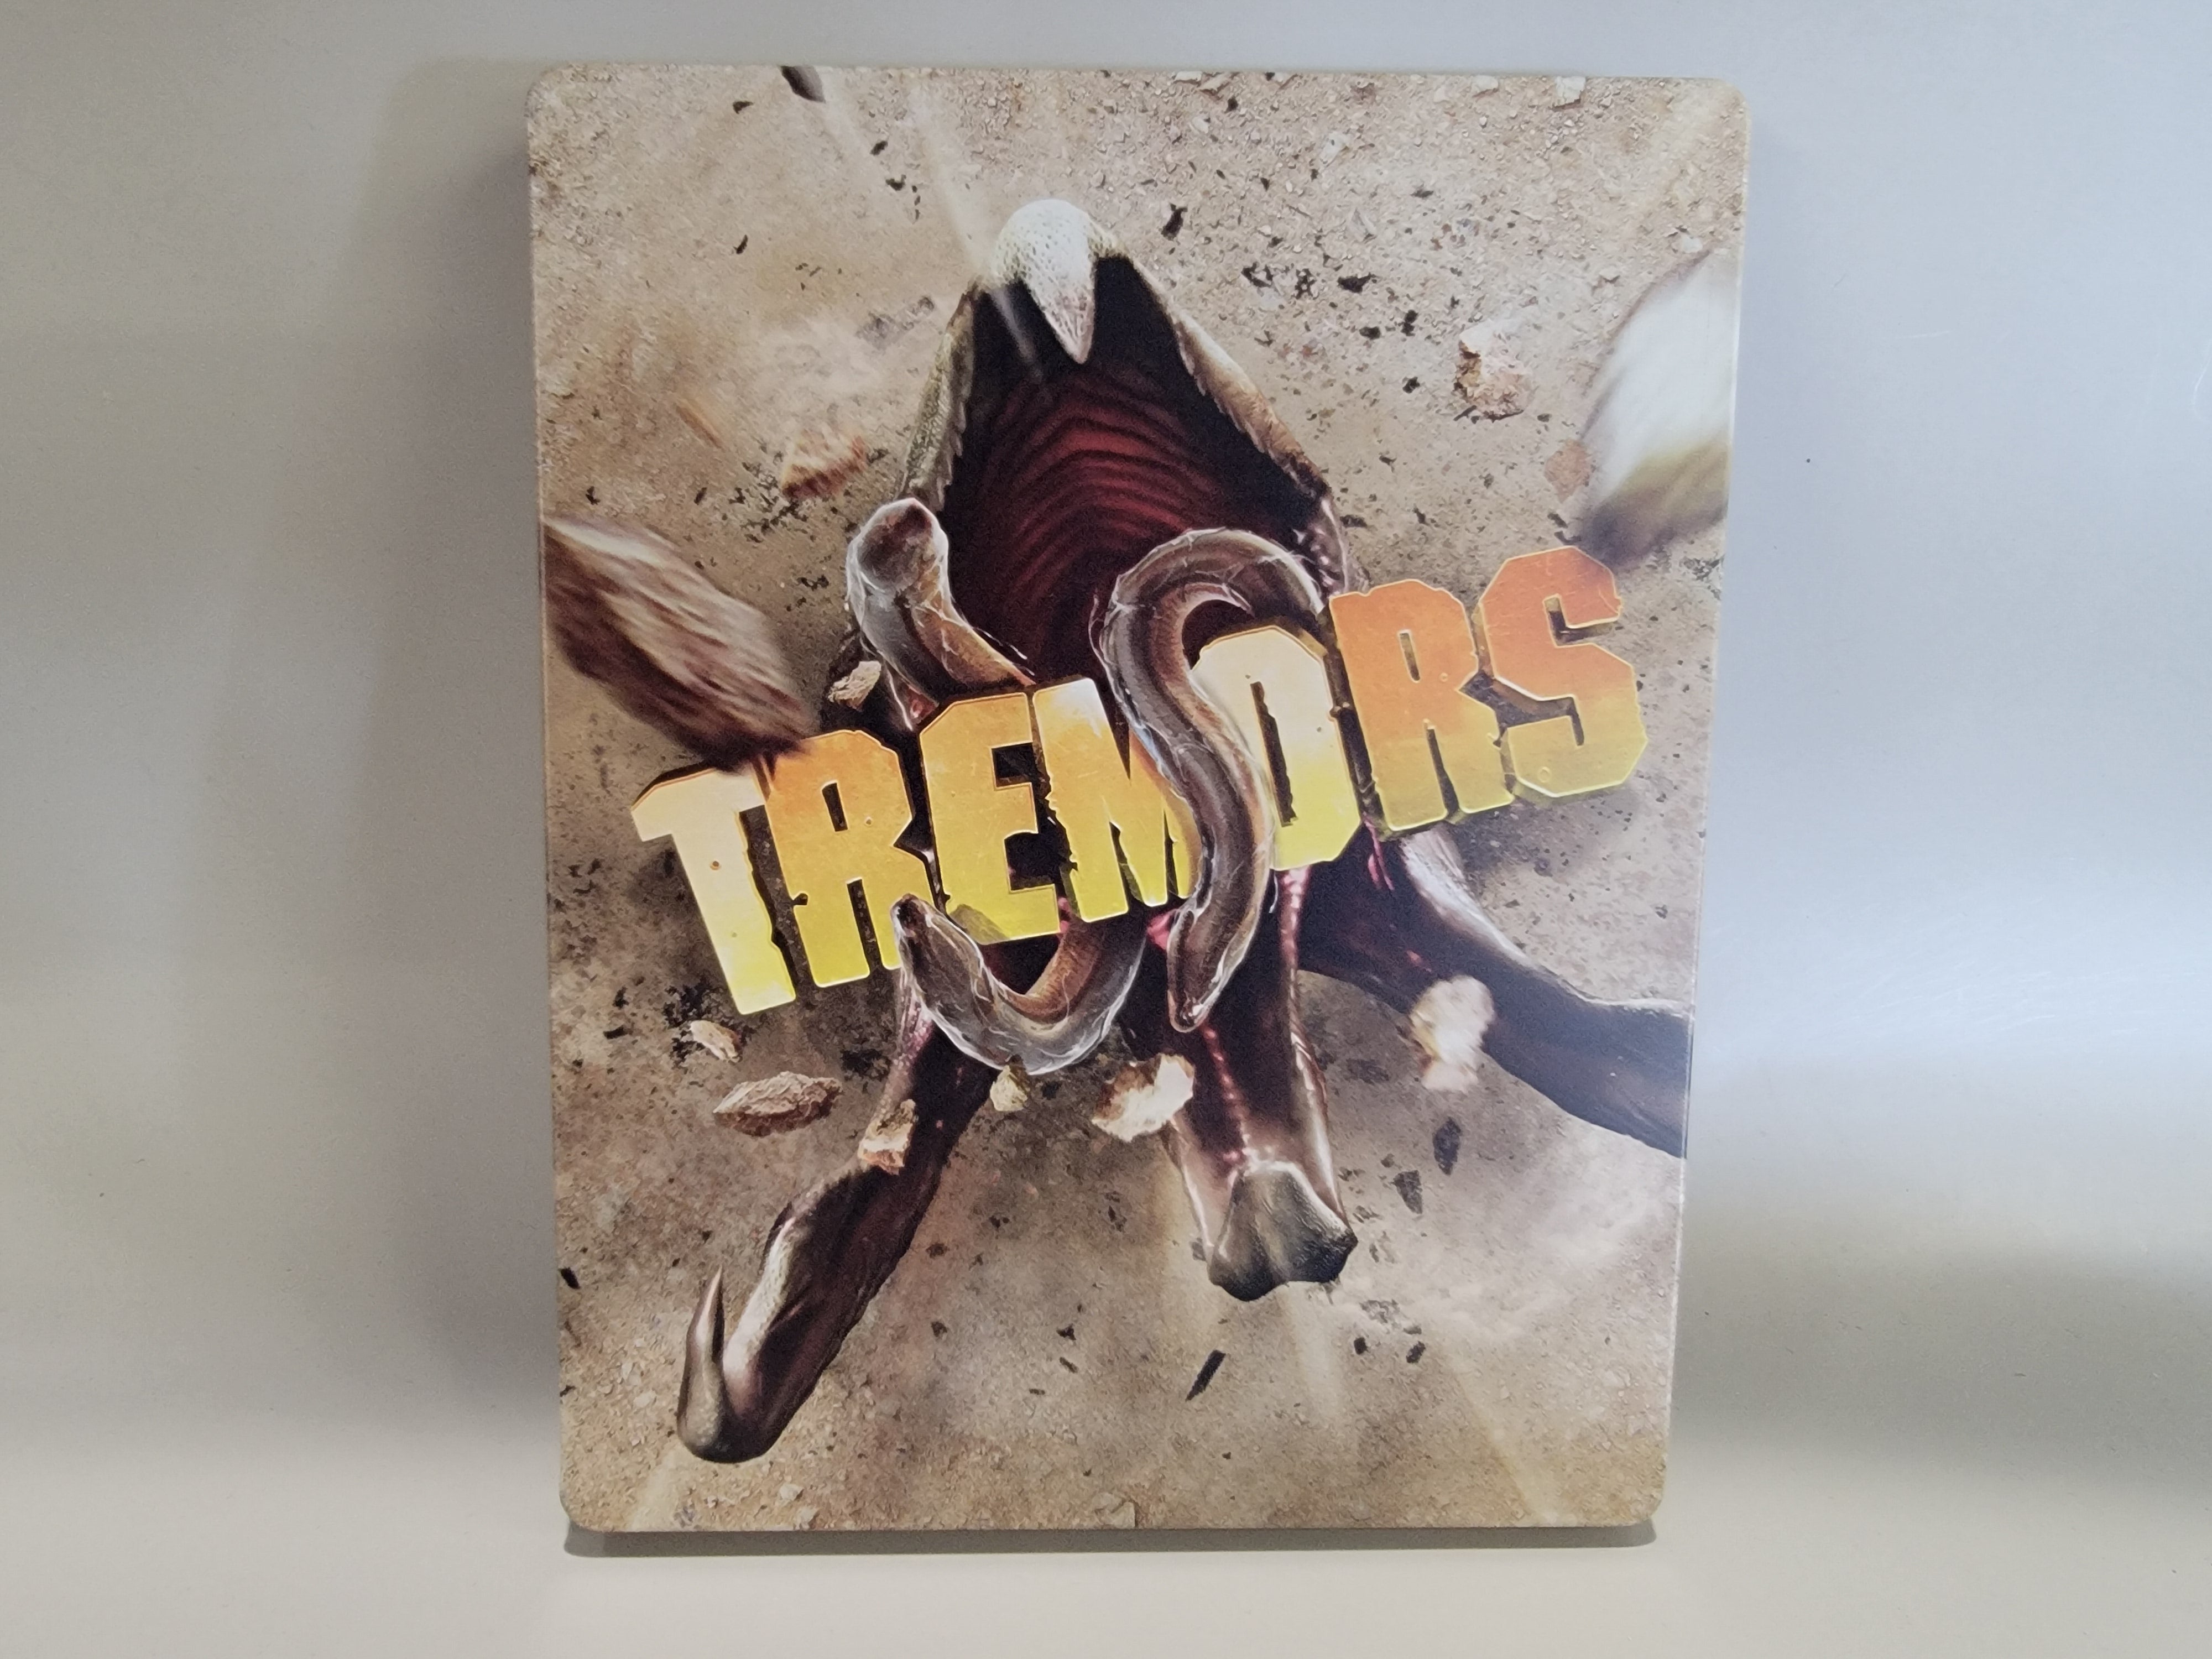 TREMORS (LIMITED EDITION) BLU-RAY STEELBOOK [USED]